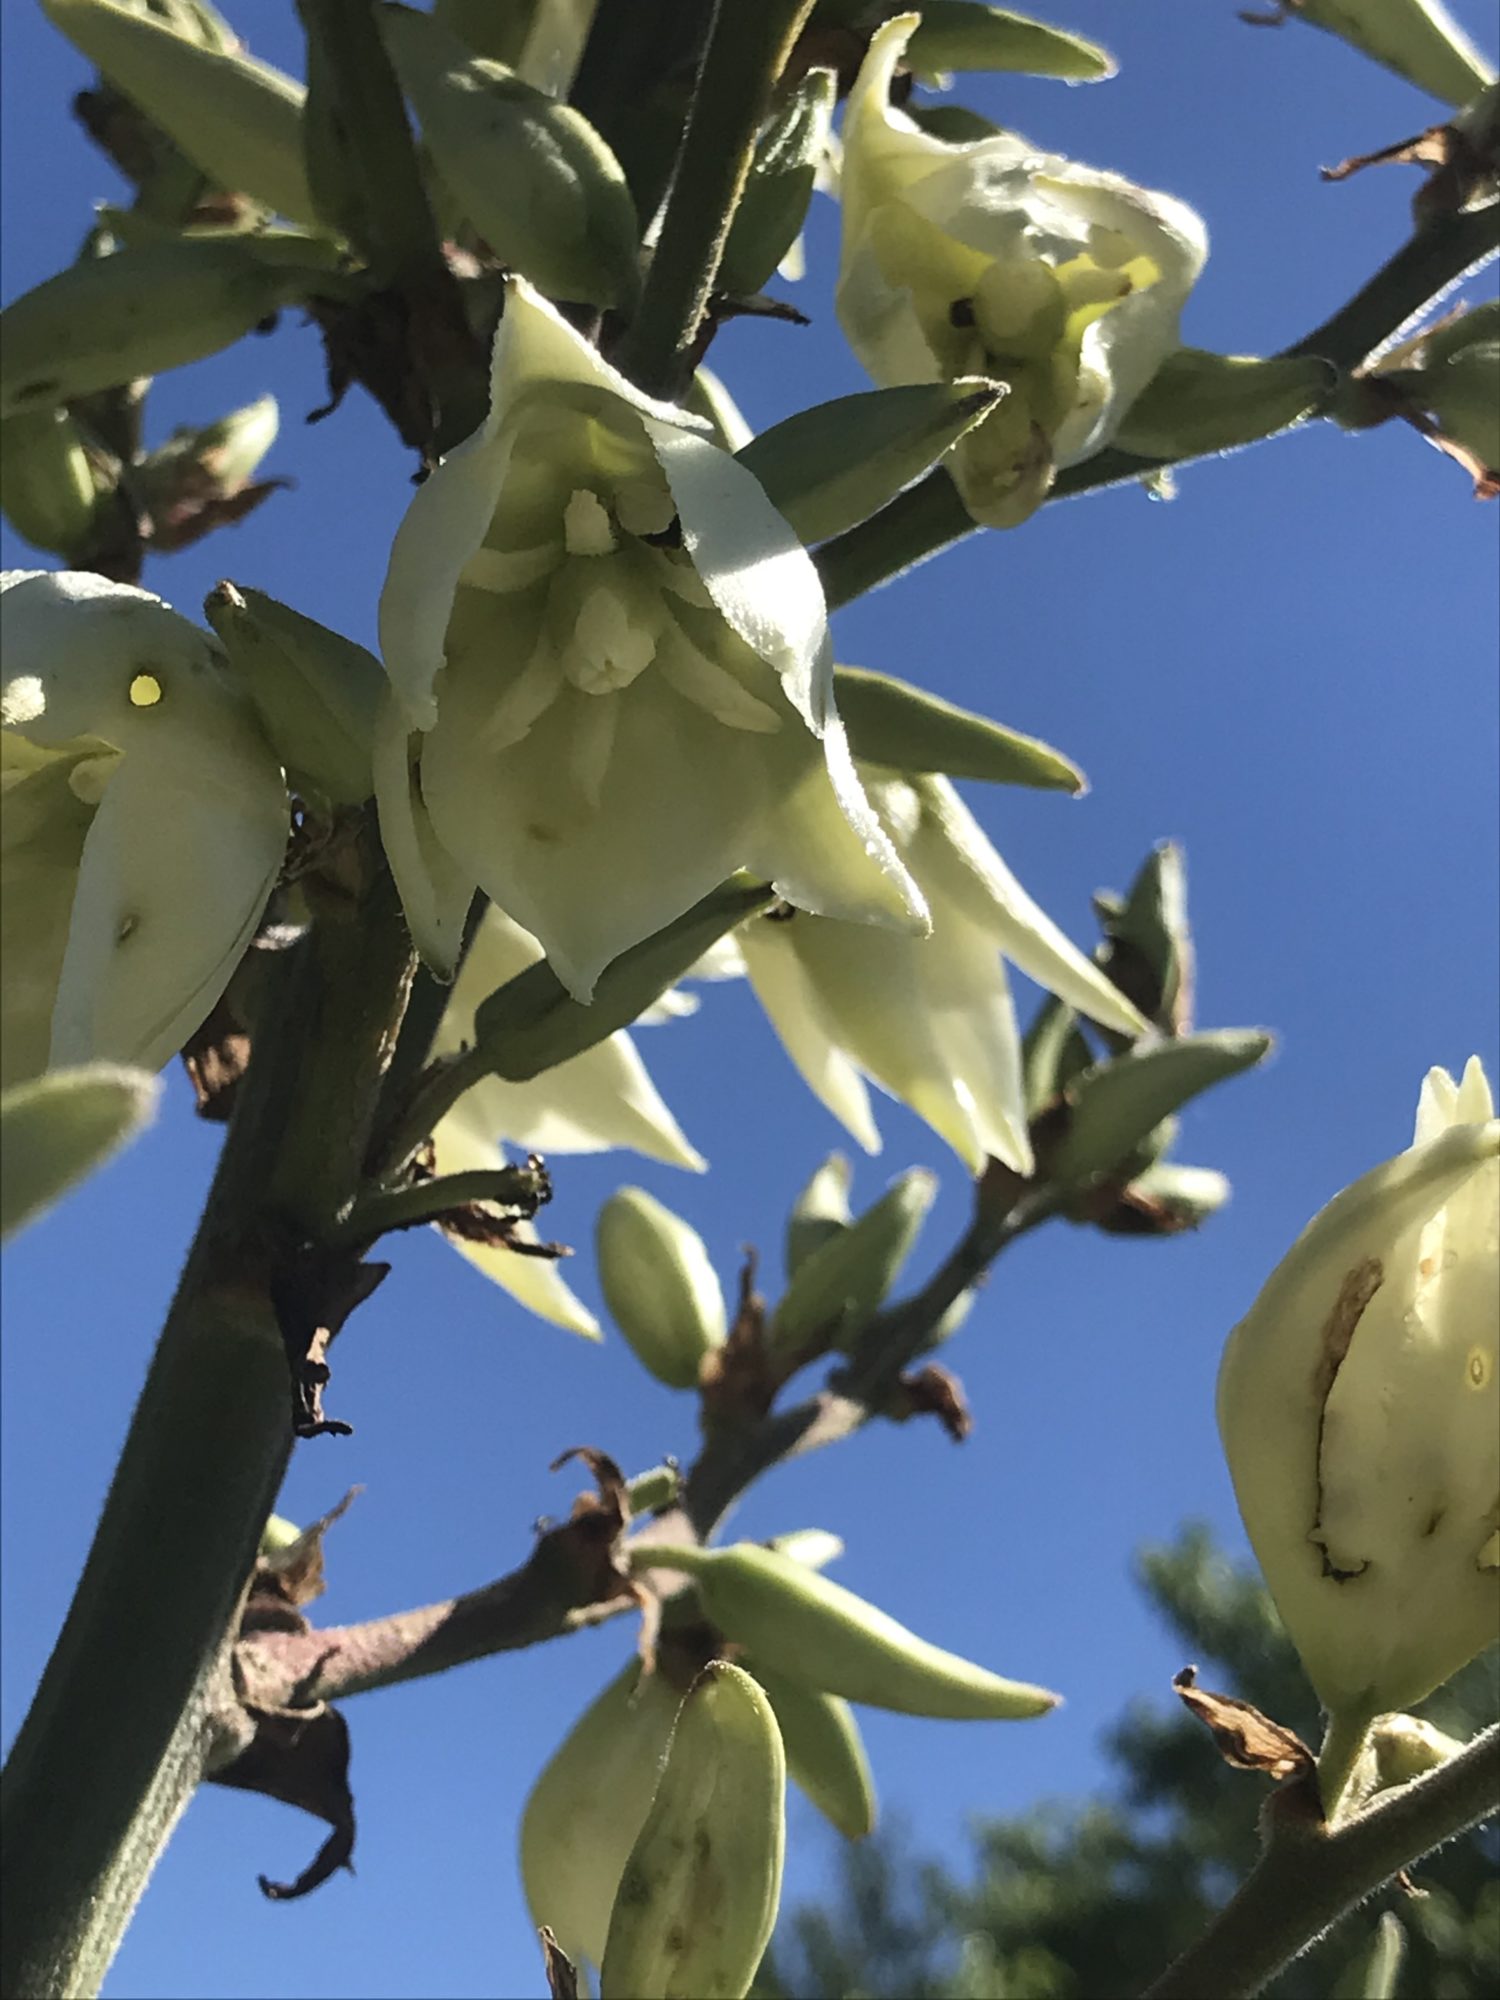 The New Jersey Yucca, with its spiky white blossoms, containing a camouflaged yucca moth in the center flower.  Photo: POP.